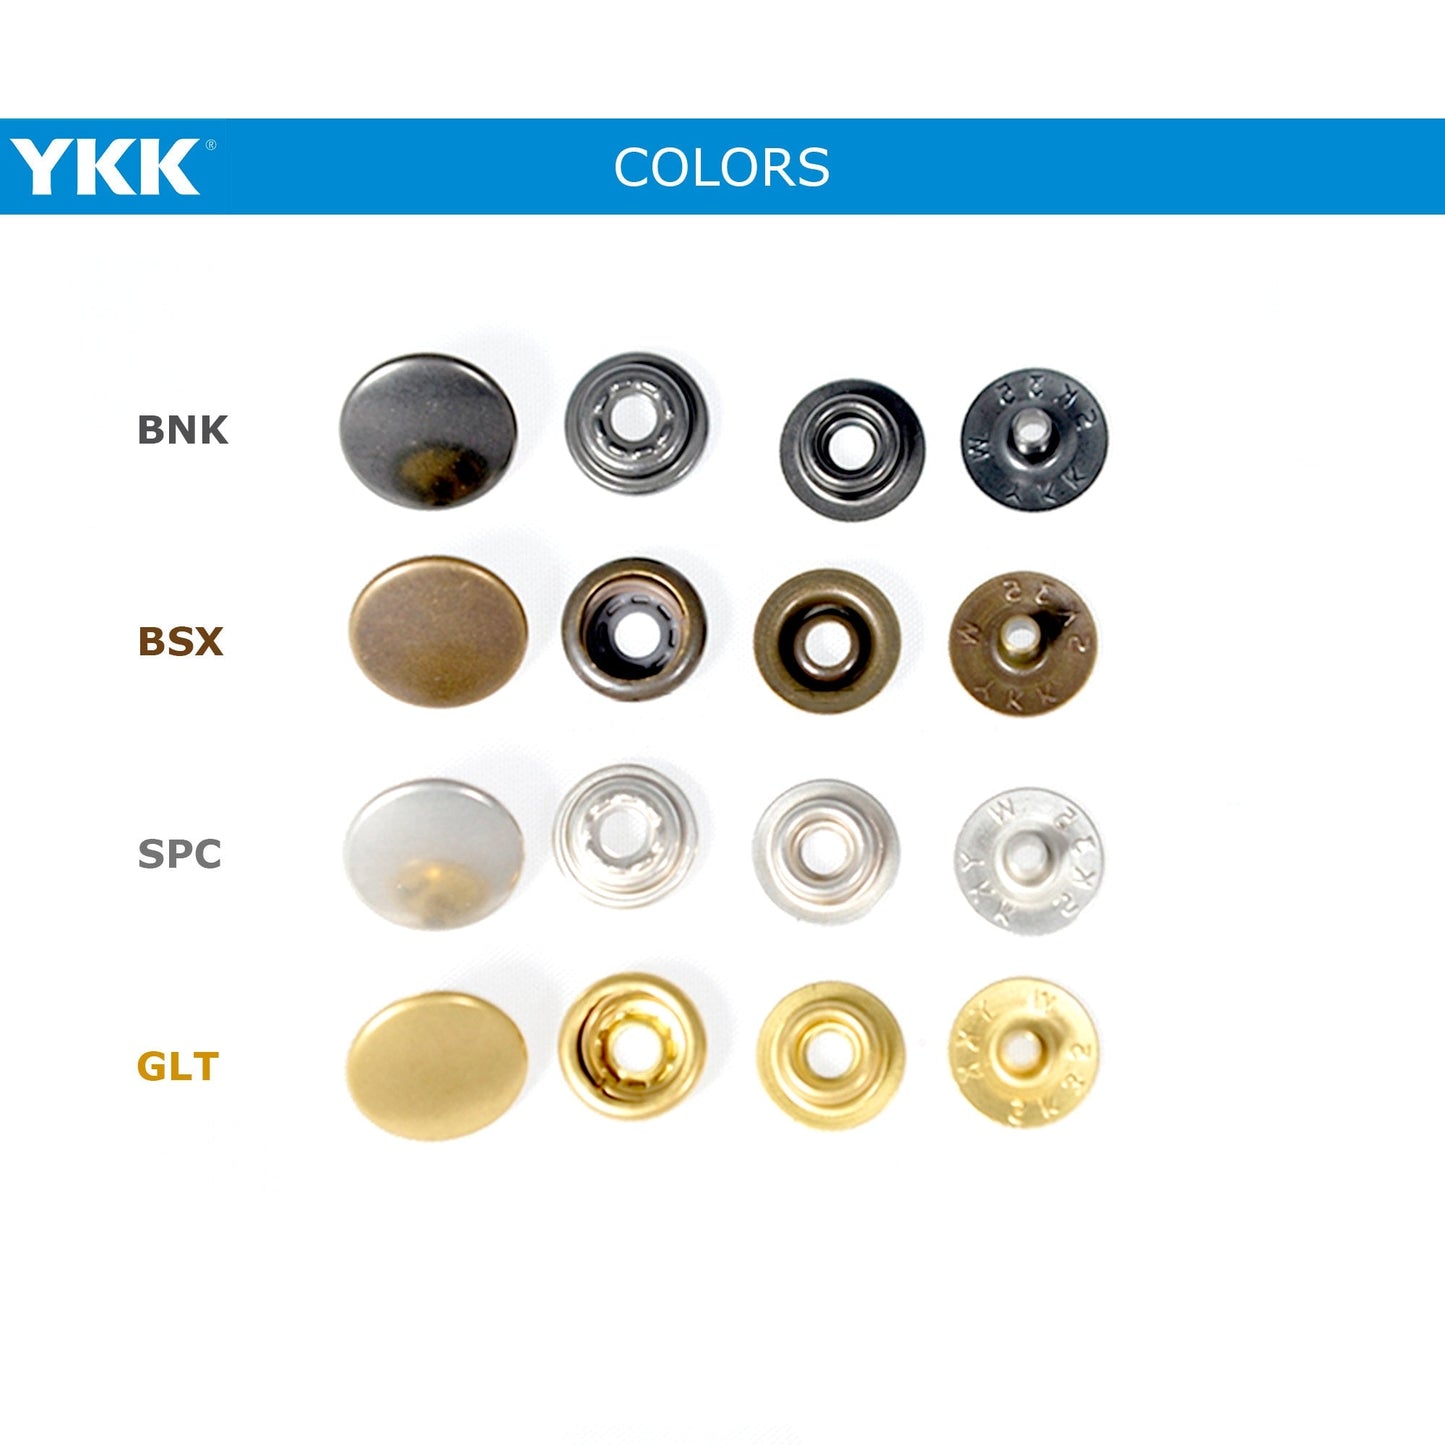 YKK SK35 Four Parts Ring-spring Button, Snap Button, Brass Button, Snaps, Metal Snap Snap ButtonsYKK